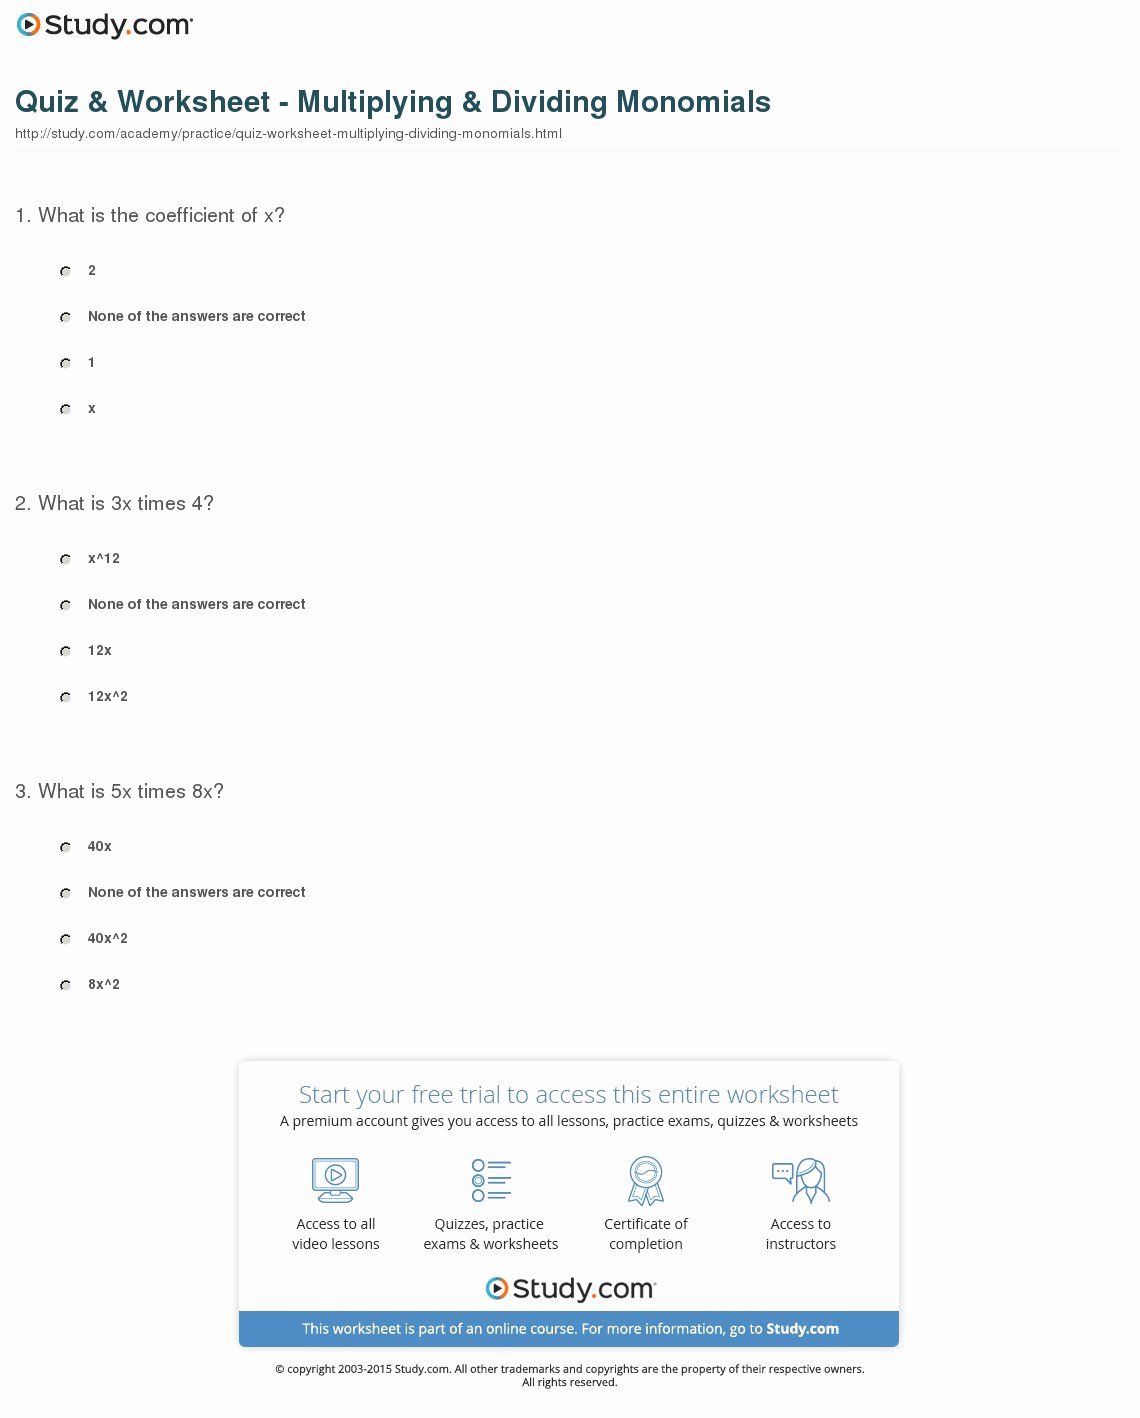 Multiplying Monomials Worksheet Answers Lovely Quiz &amp; Worksheet Multiplying &amp; Dividing Monomials